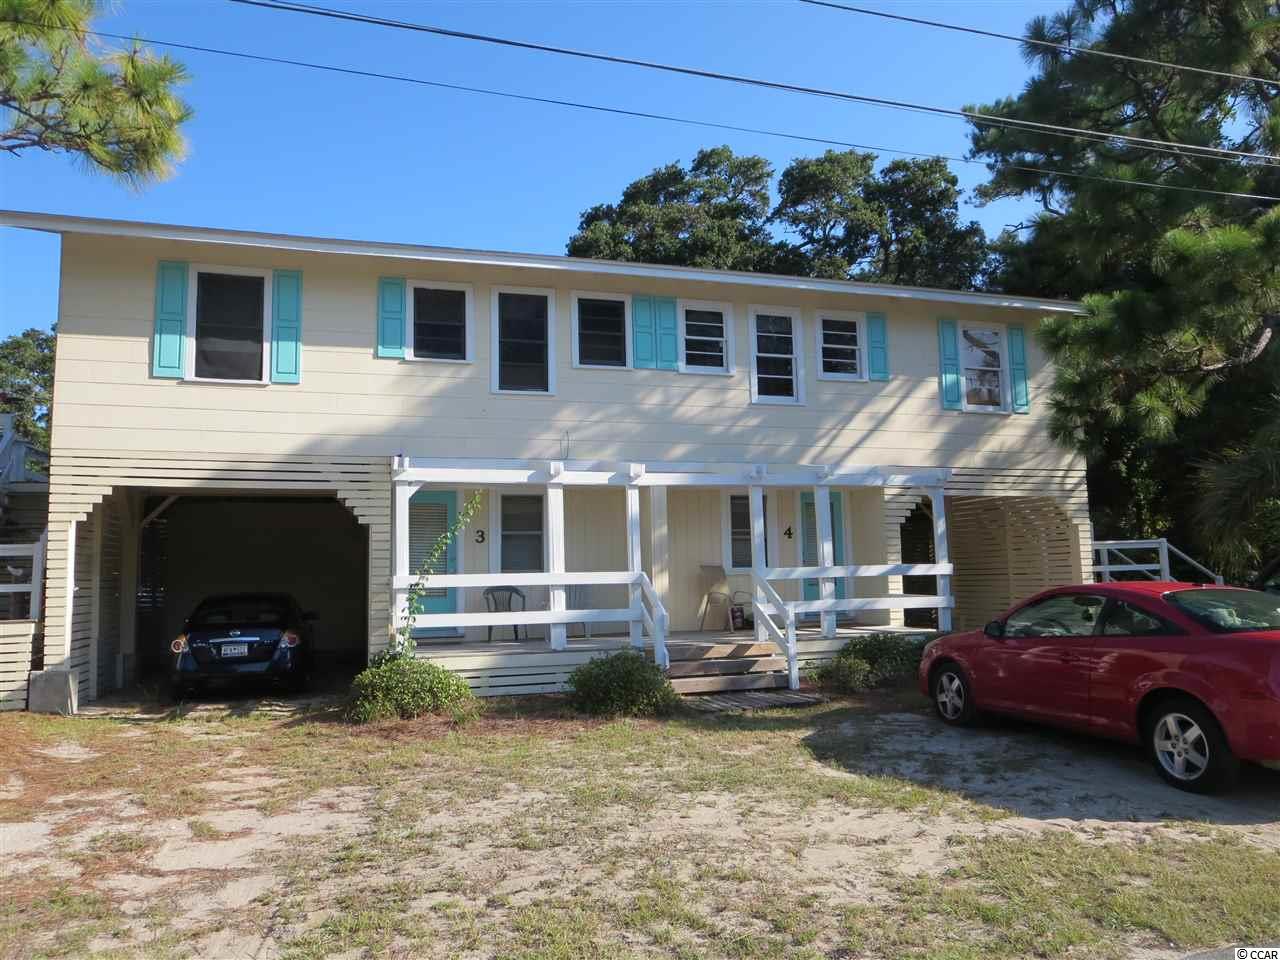 500 S 25th Ave. S North Myrtle Beach, SC 29582